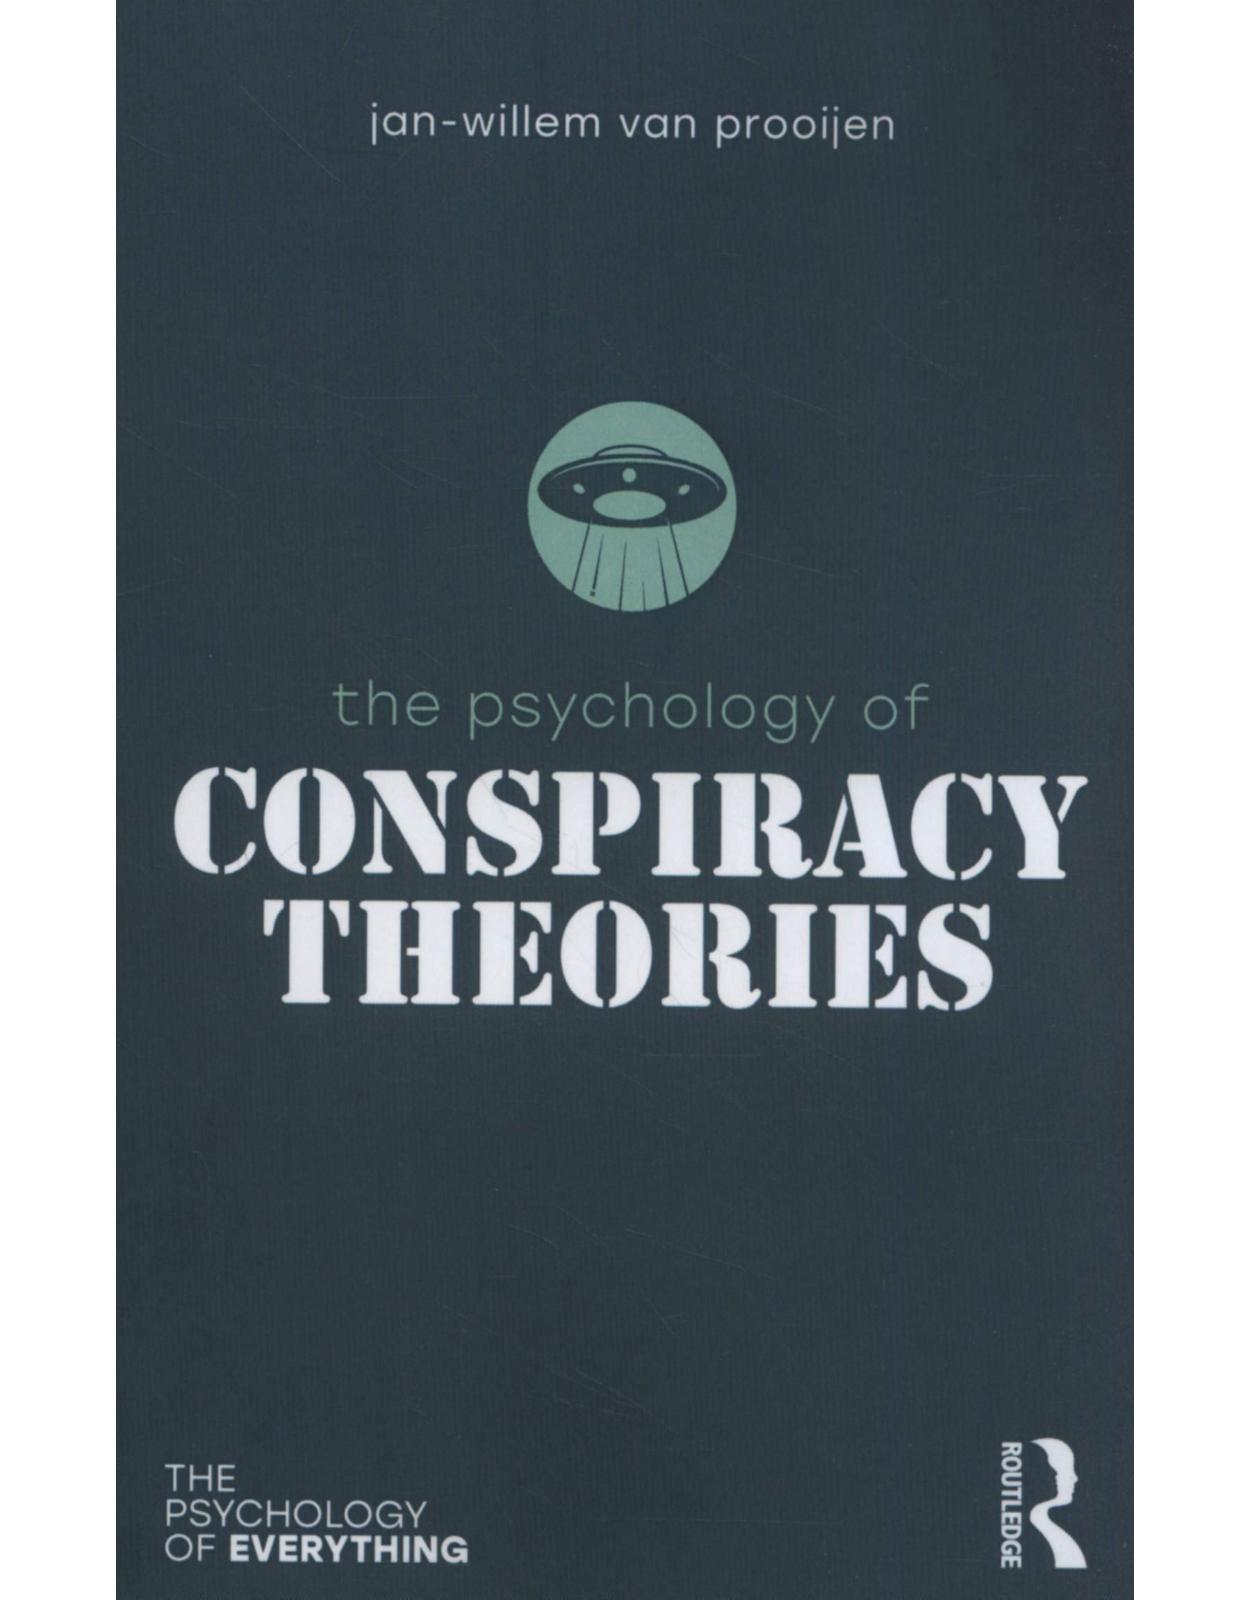 The Psychology of Conspiracy Theories (The Psychology of Everything) 